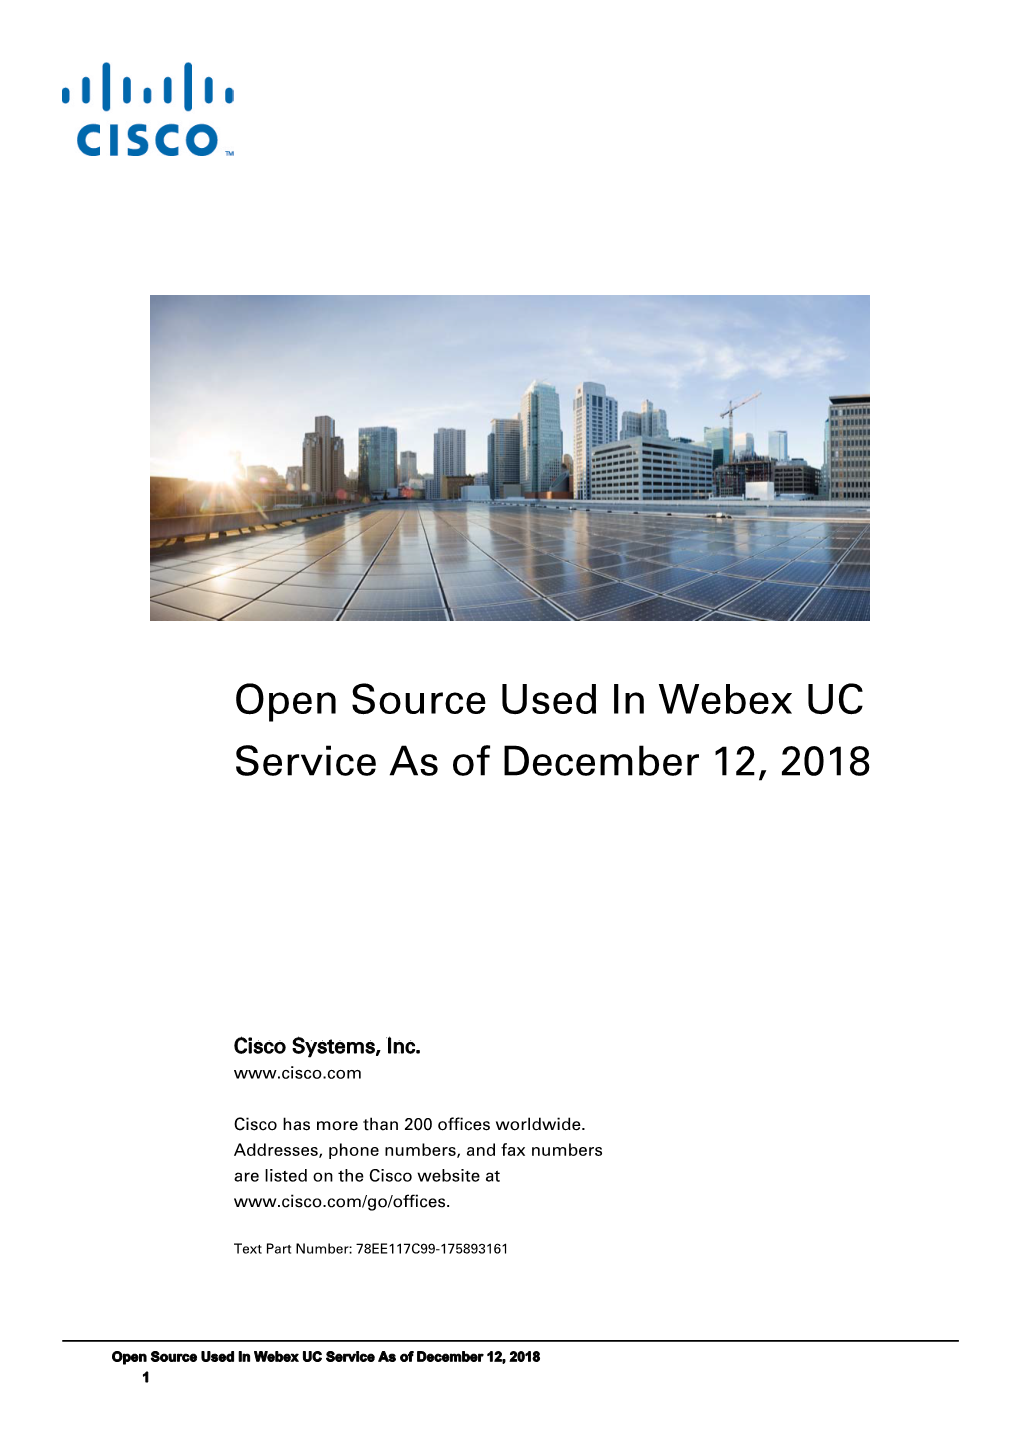 Open Sources Used in Cisco Spark UC Service